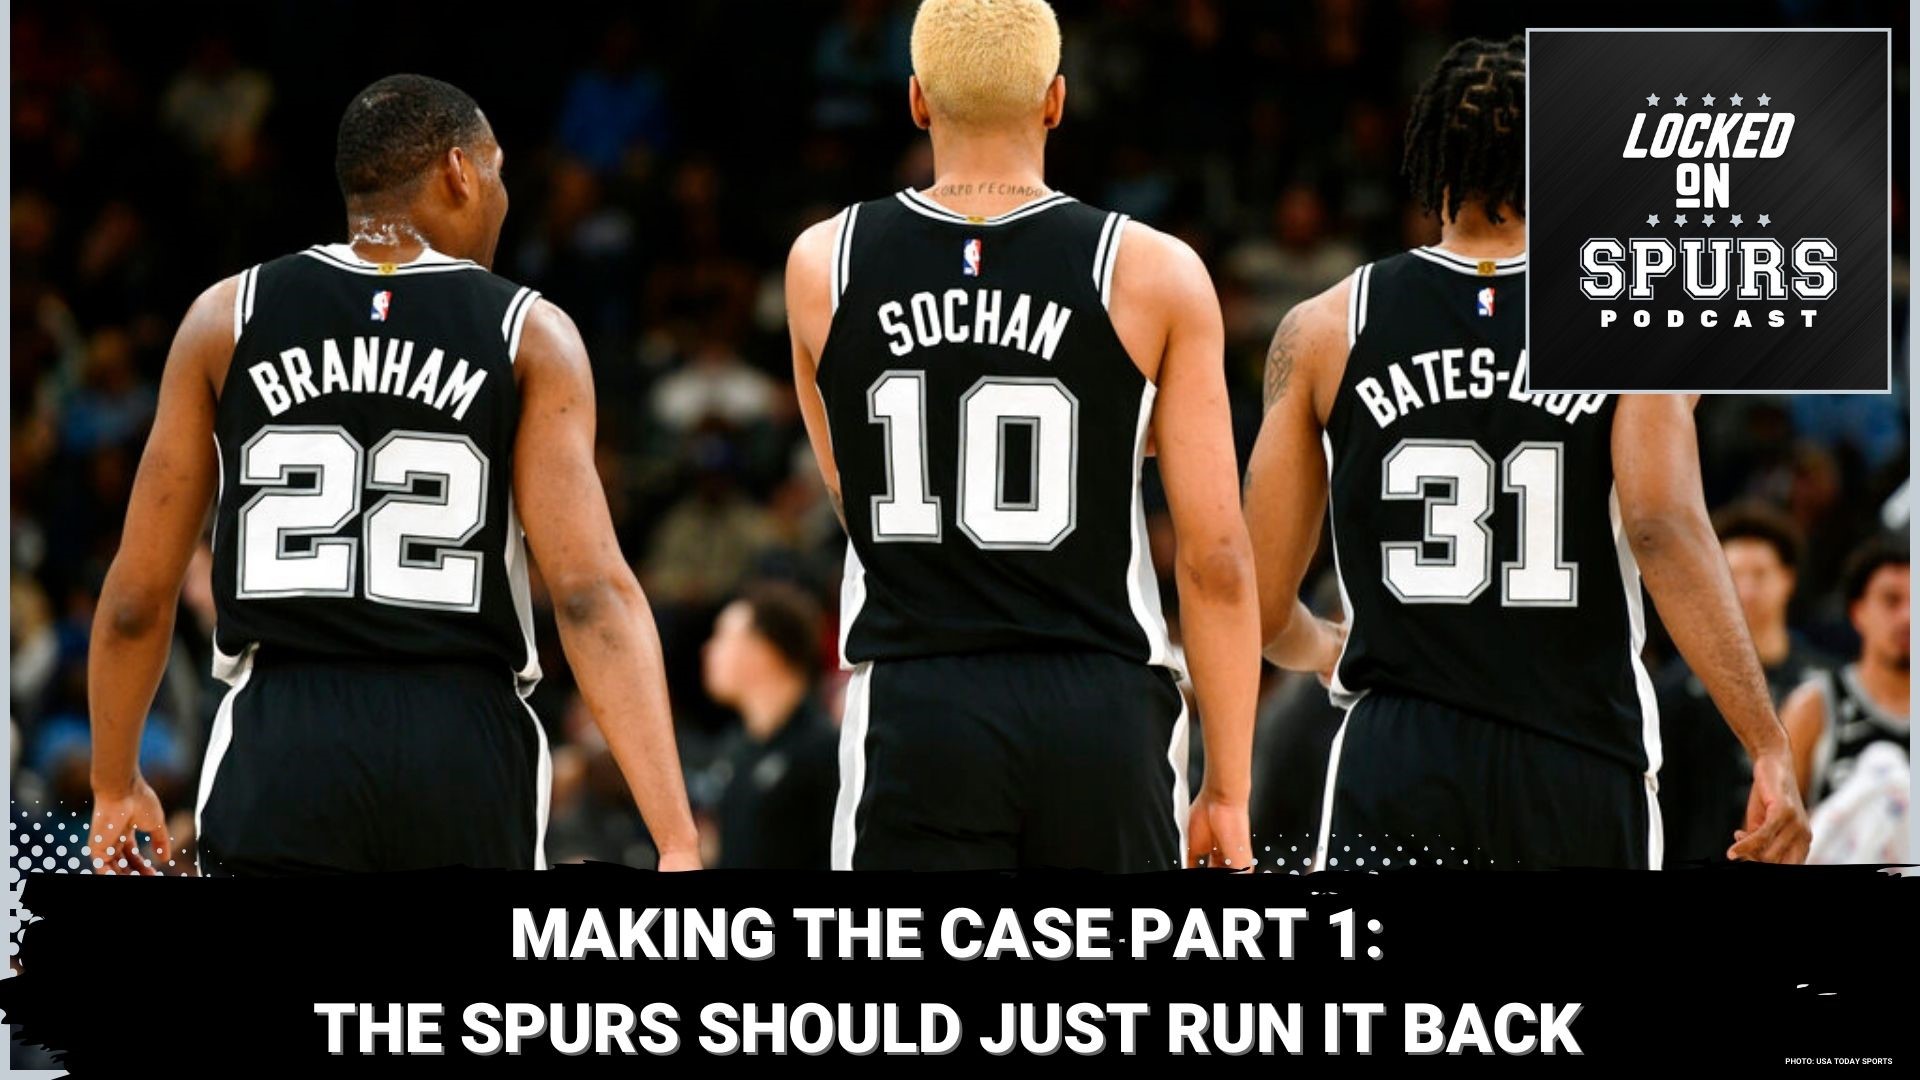 In part one of this series, we discuss if the best course for the Spurs' rebuild is to make no major roster moves.